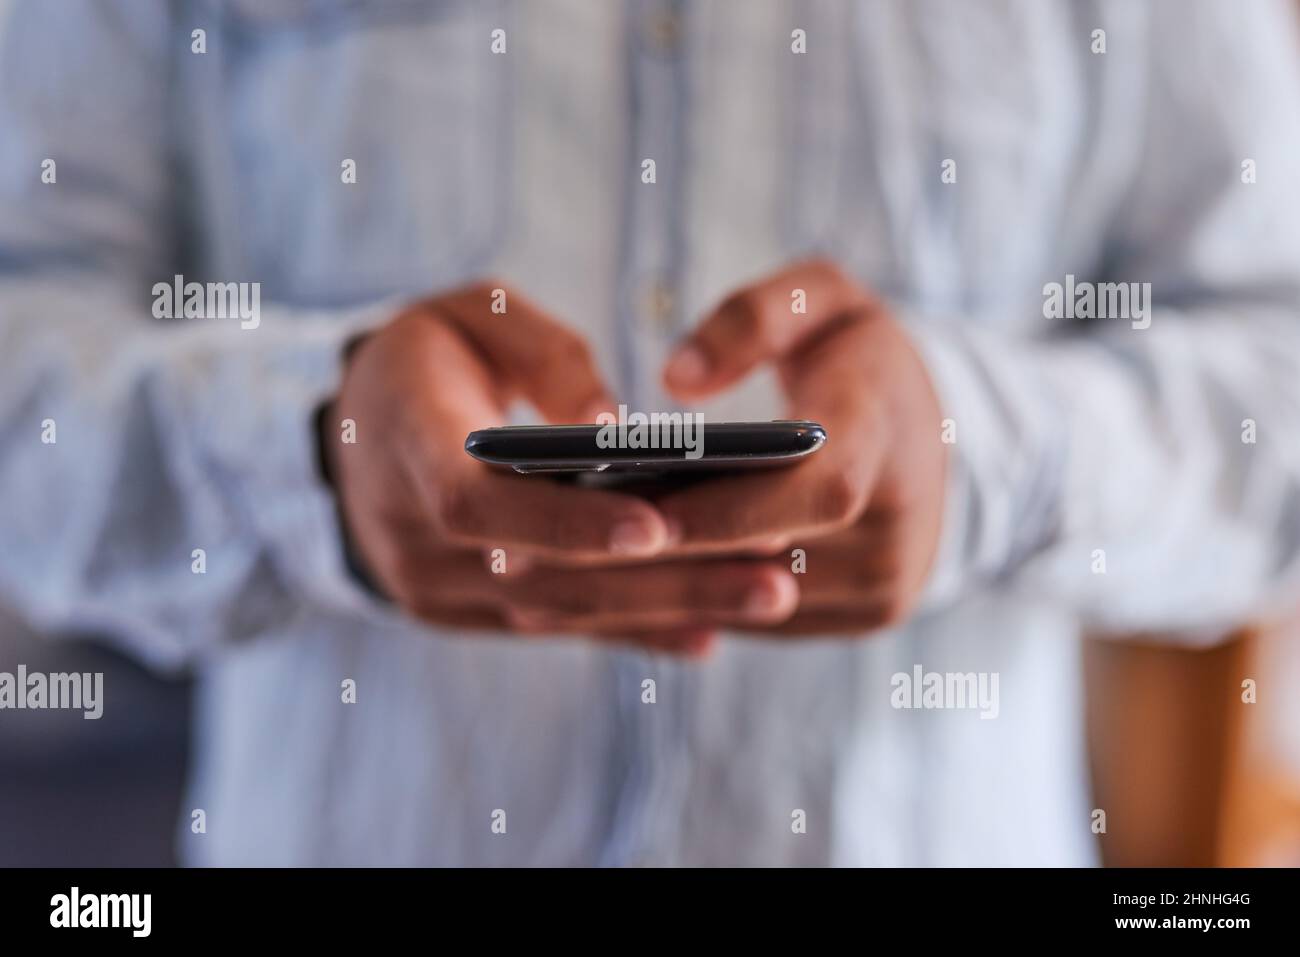 A tight shot of a man's hands typing on a mobile phone Stock Photo